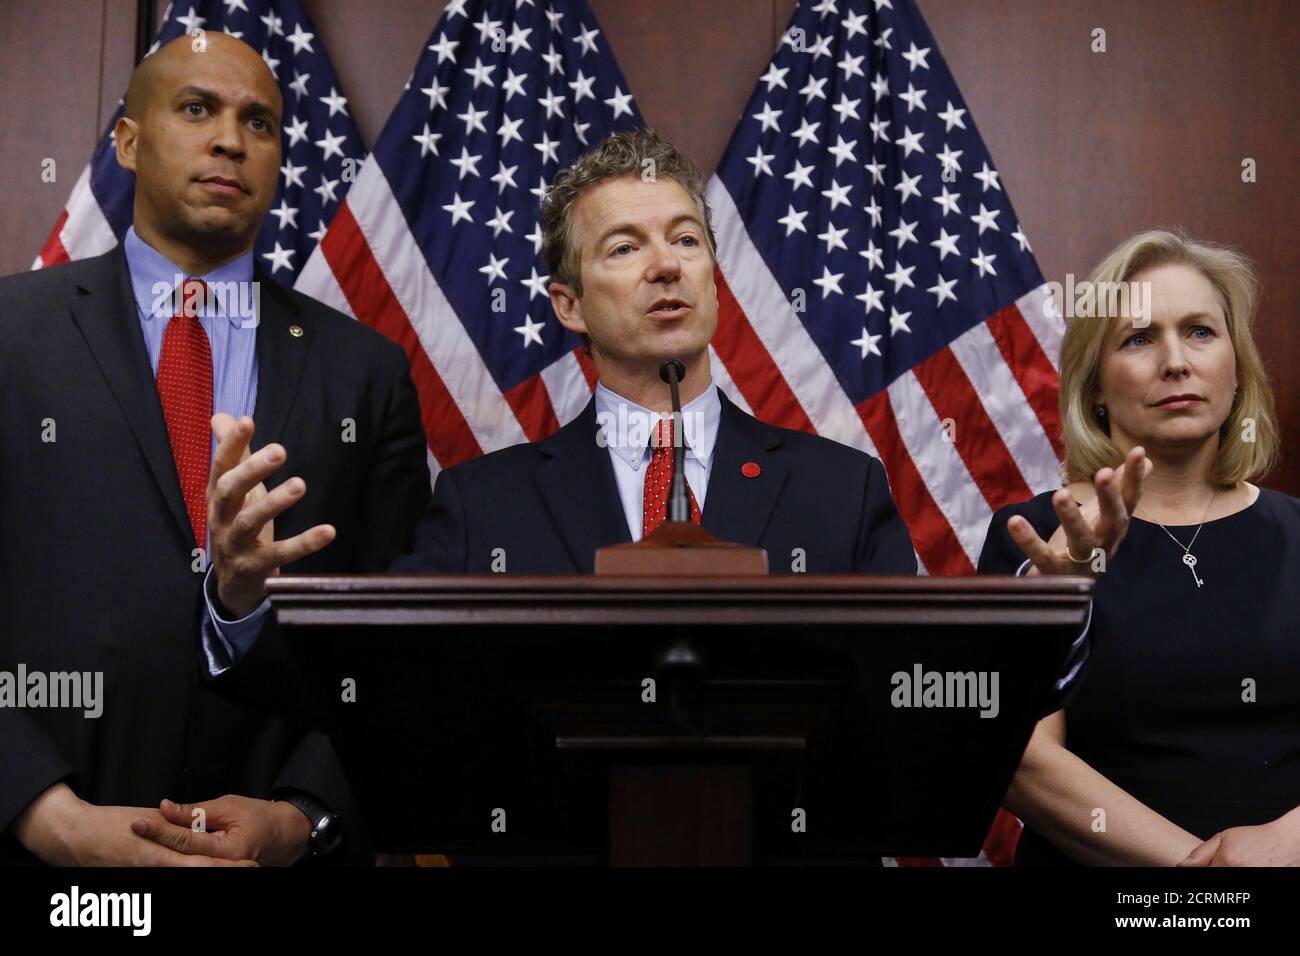 U.S. Senator Cory Booker (D-NJ) (L-R), Senator Rand Paul (R-KY), and Senator Kirsten Gillibrand (D-NY) hold a news conference, to introduce legislation that would prevent the federal government from prosecuting medical marijuana users in states where it is legal, at the U.S. Capitol in Washington, March 10, 2015.  REUTERS/Jonathan Ernst    (UNITED STATES - Tags: POLITICS HEALTH SOCIETY) Stock Photo